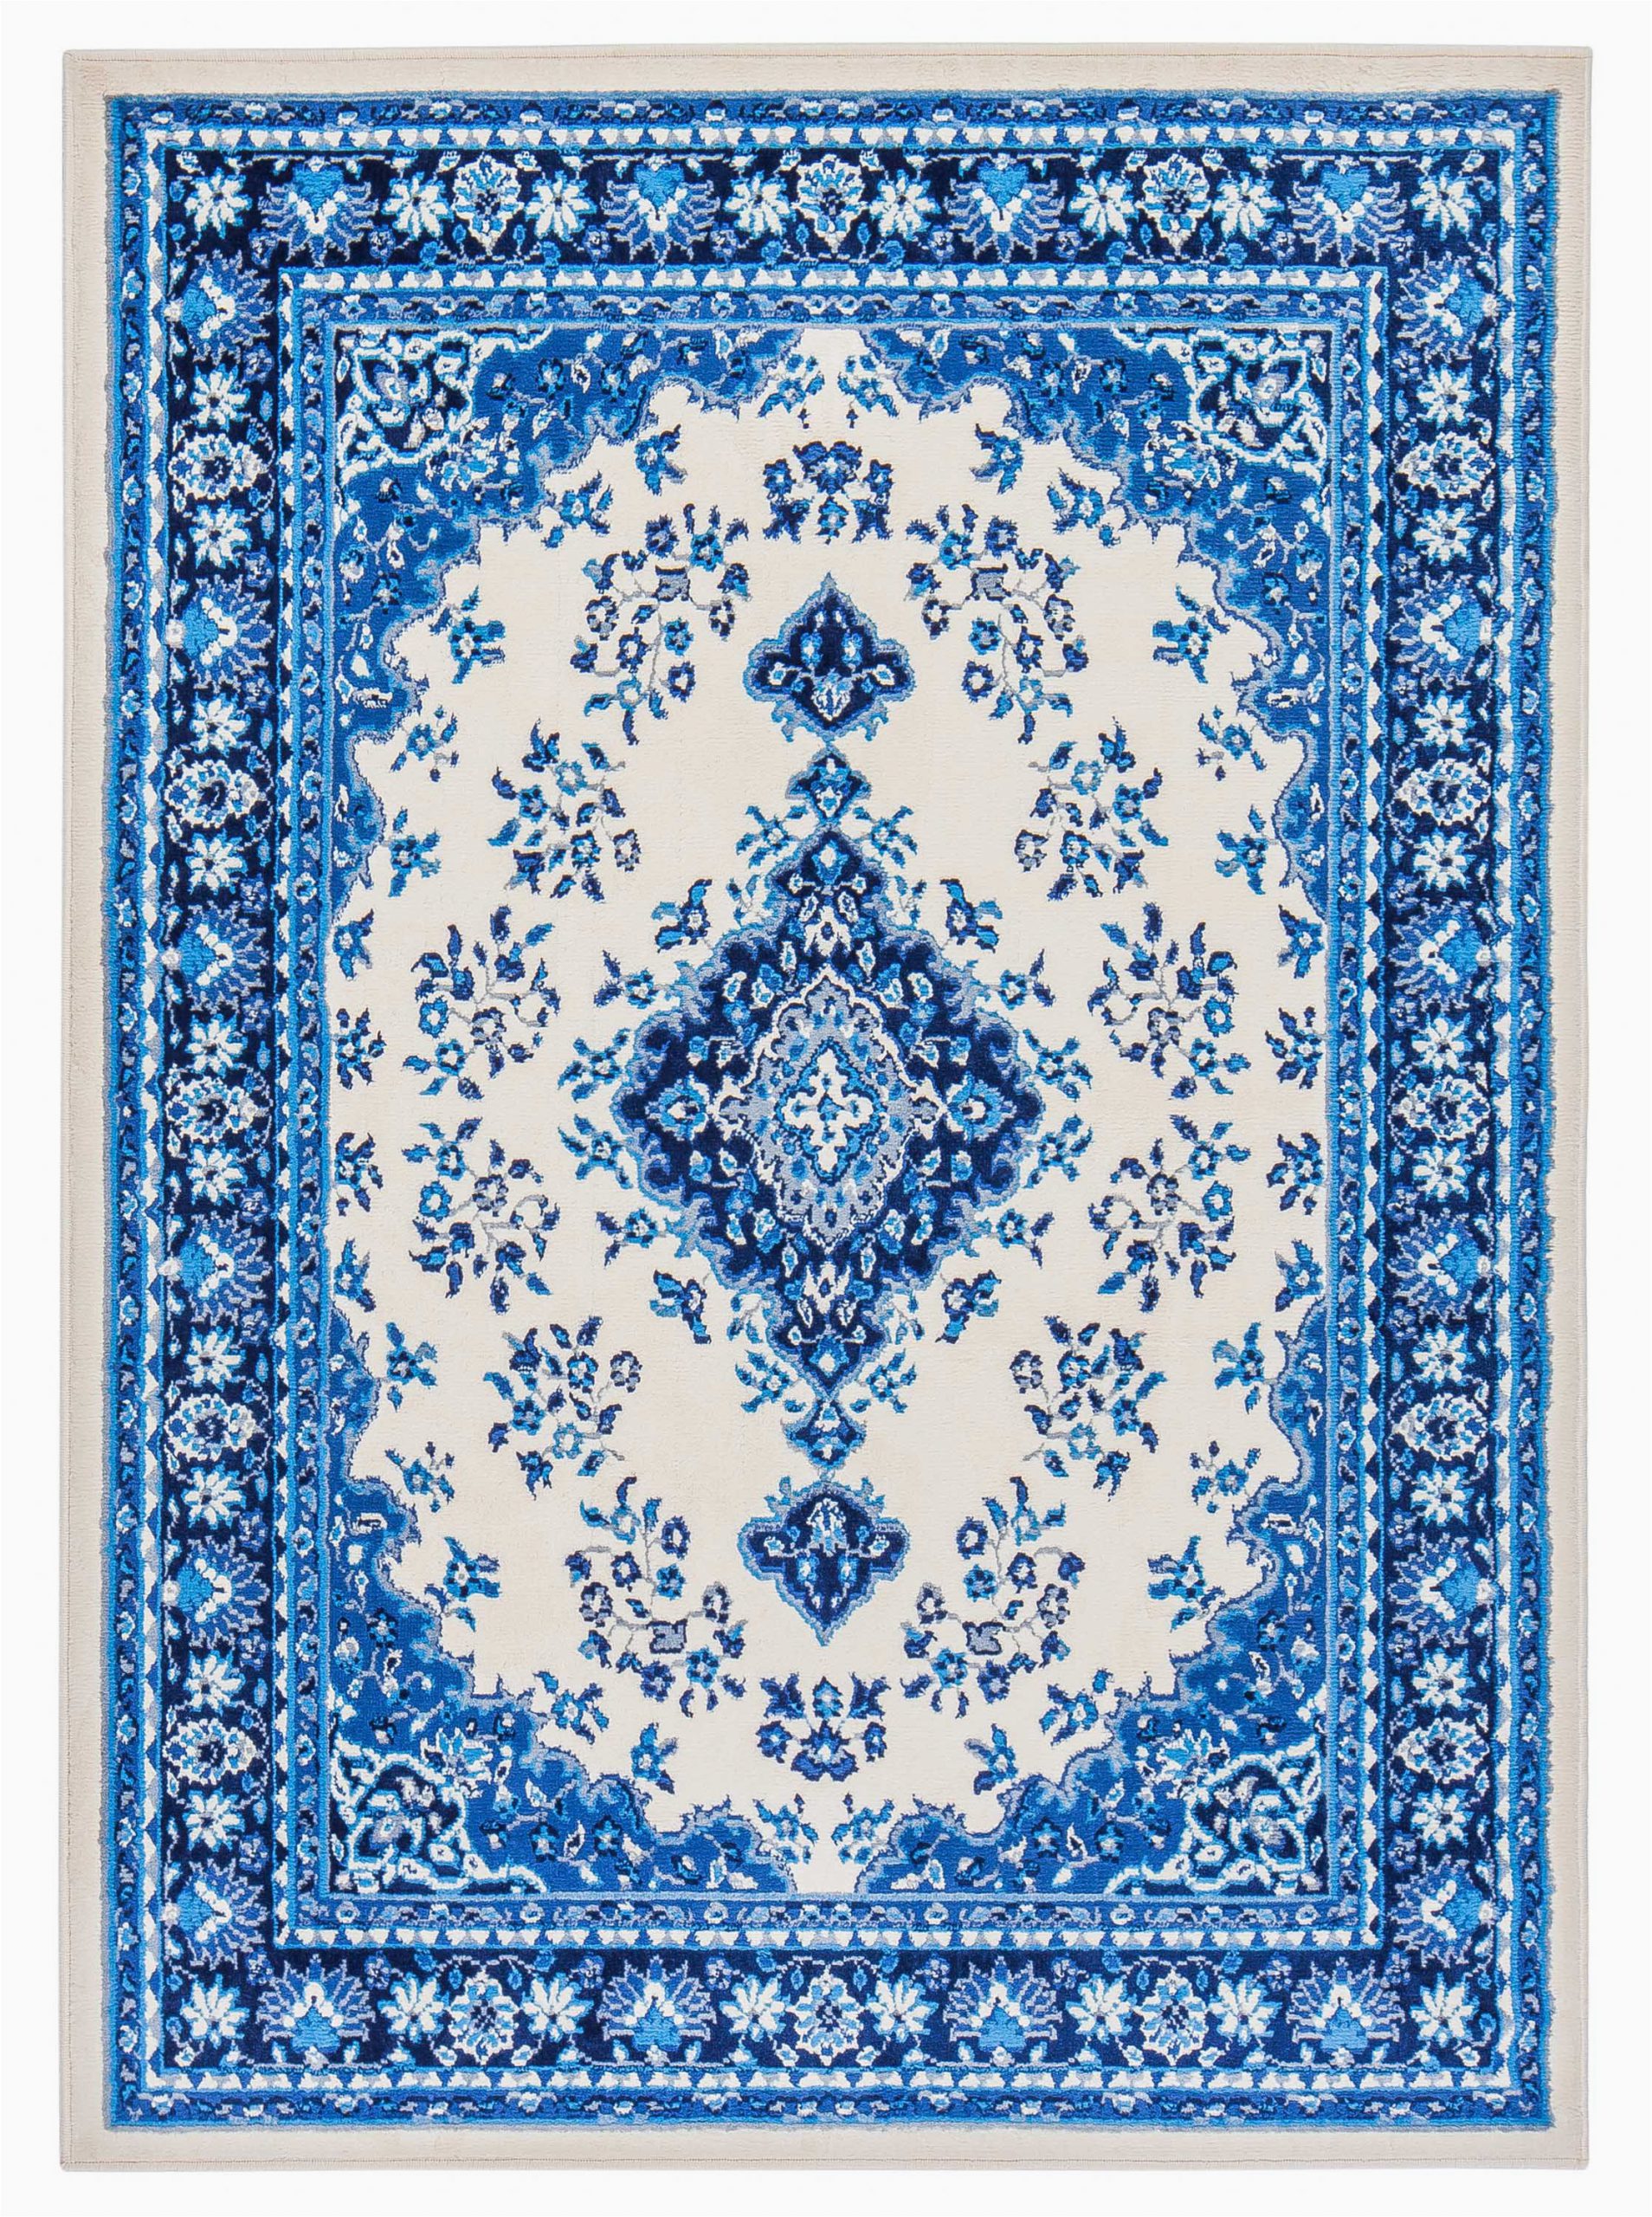 Blue and White Persian Rug Global Persian Blue and White Medallion Rug Walmart